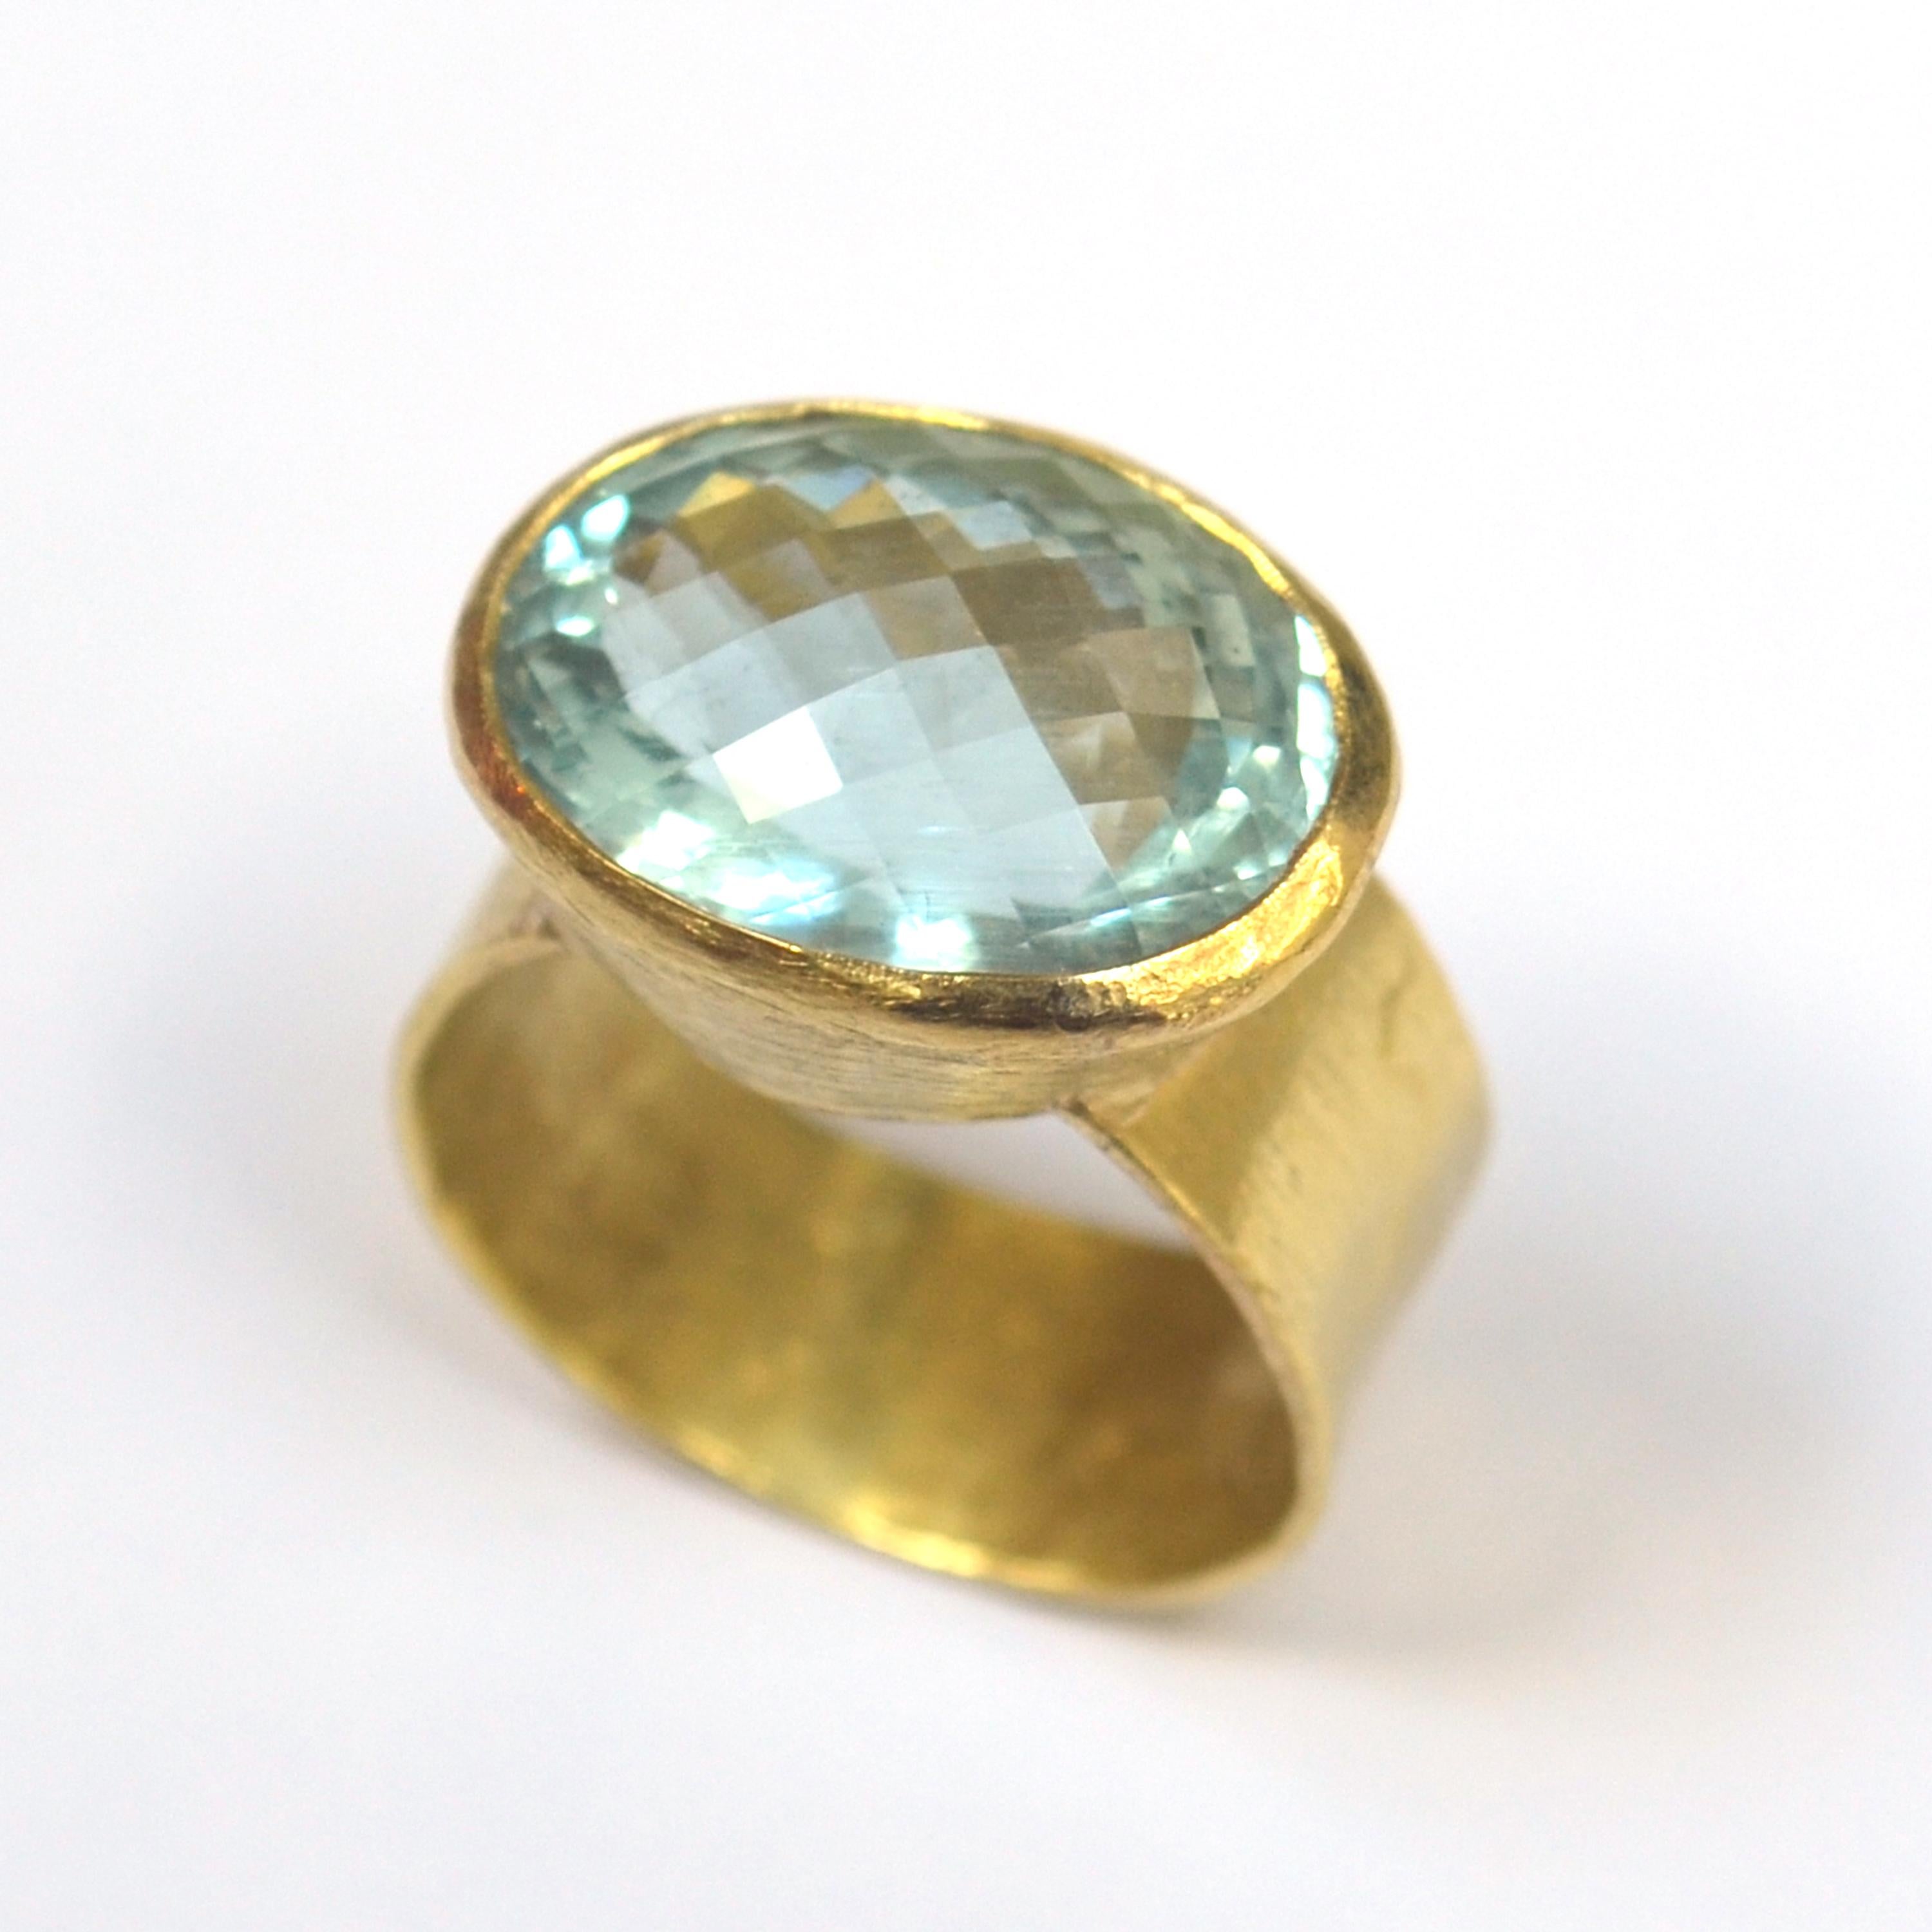 Contemporary Chequerboard Cut Aquamarine Wide 18k Gold Cocktail Ring Handmade by Disa Allsopp